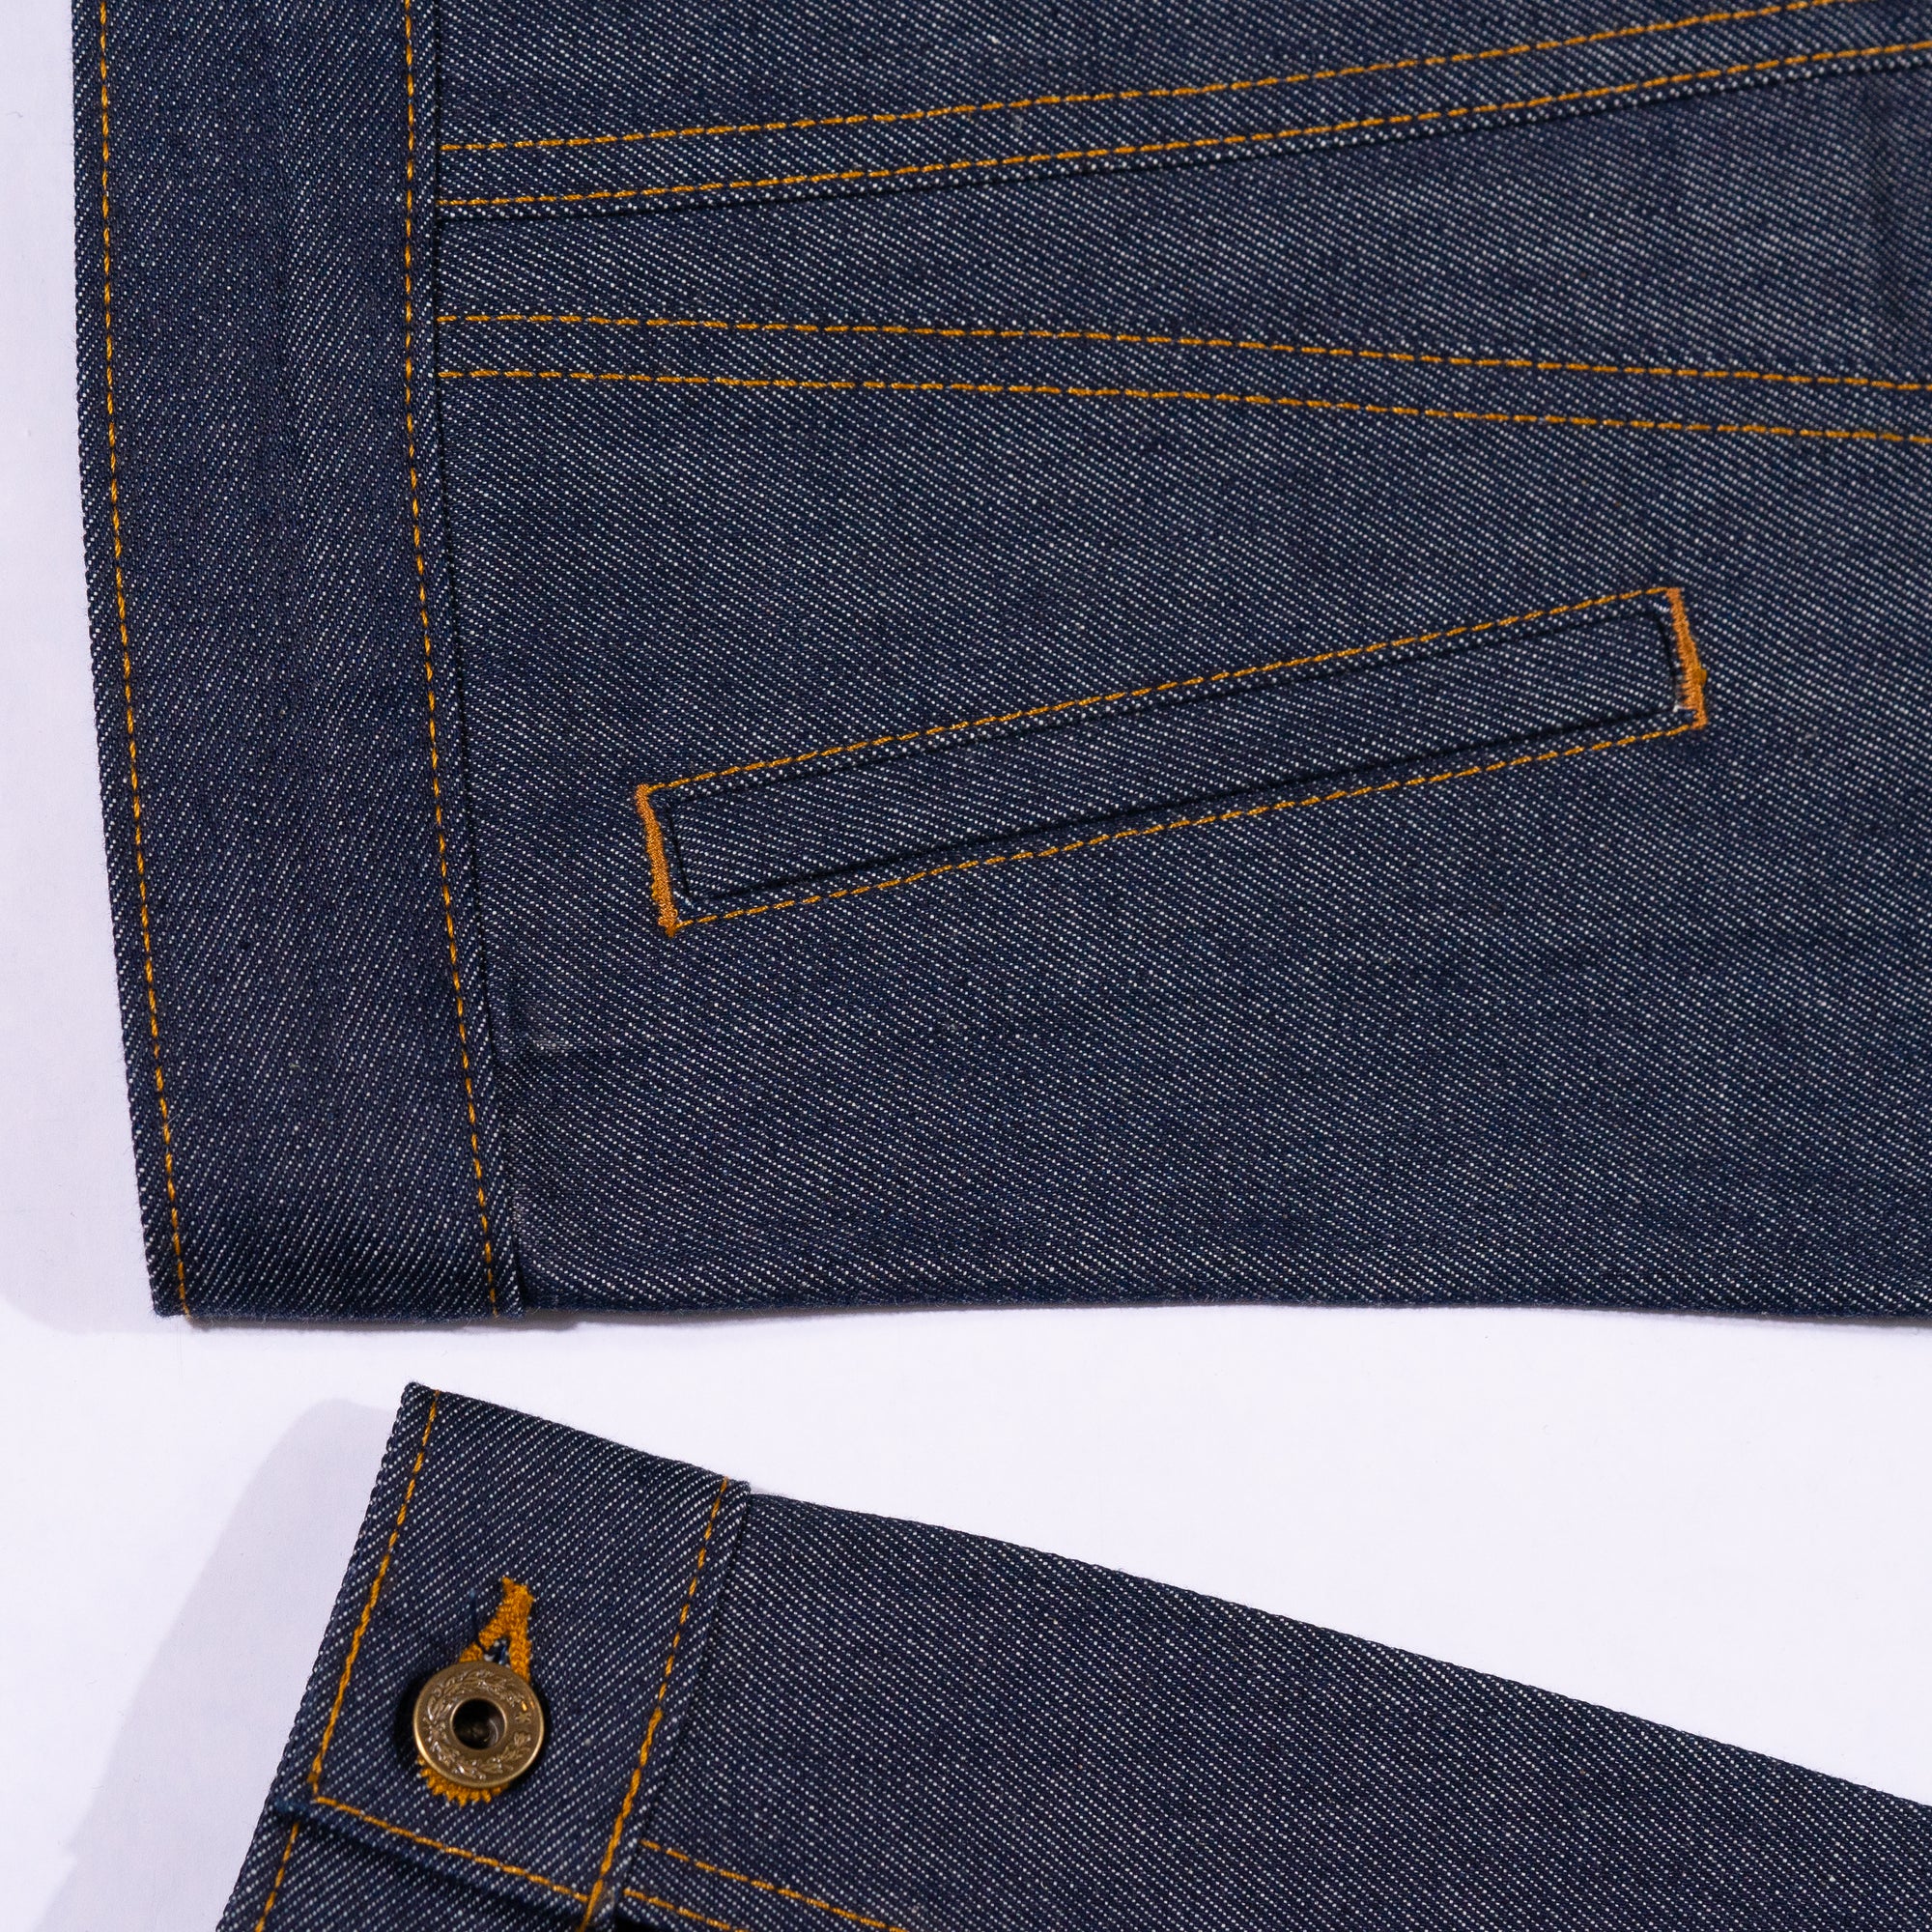 The Ironside Trucker just released in a sublime, vintage inspired 13oz  selvage denim from Kaihara Mills. The weft yarn has a slight yello